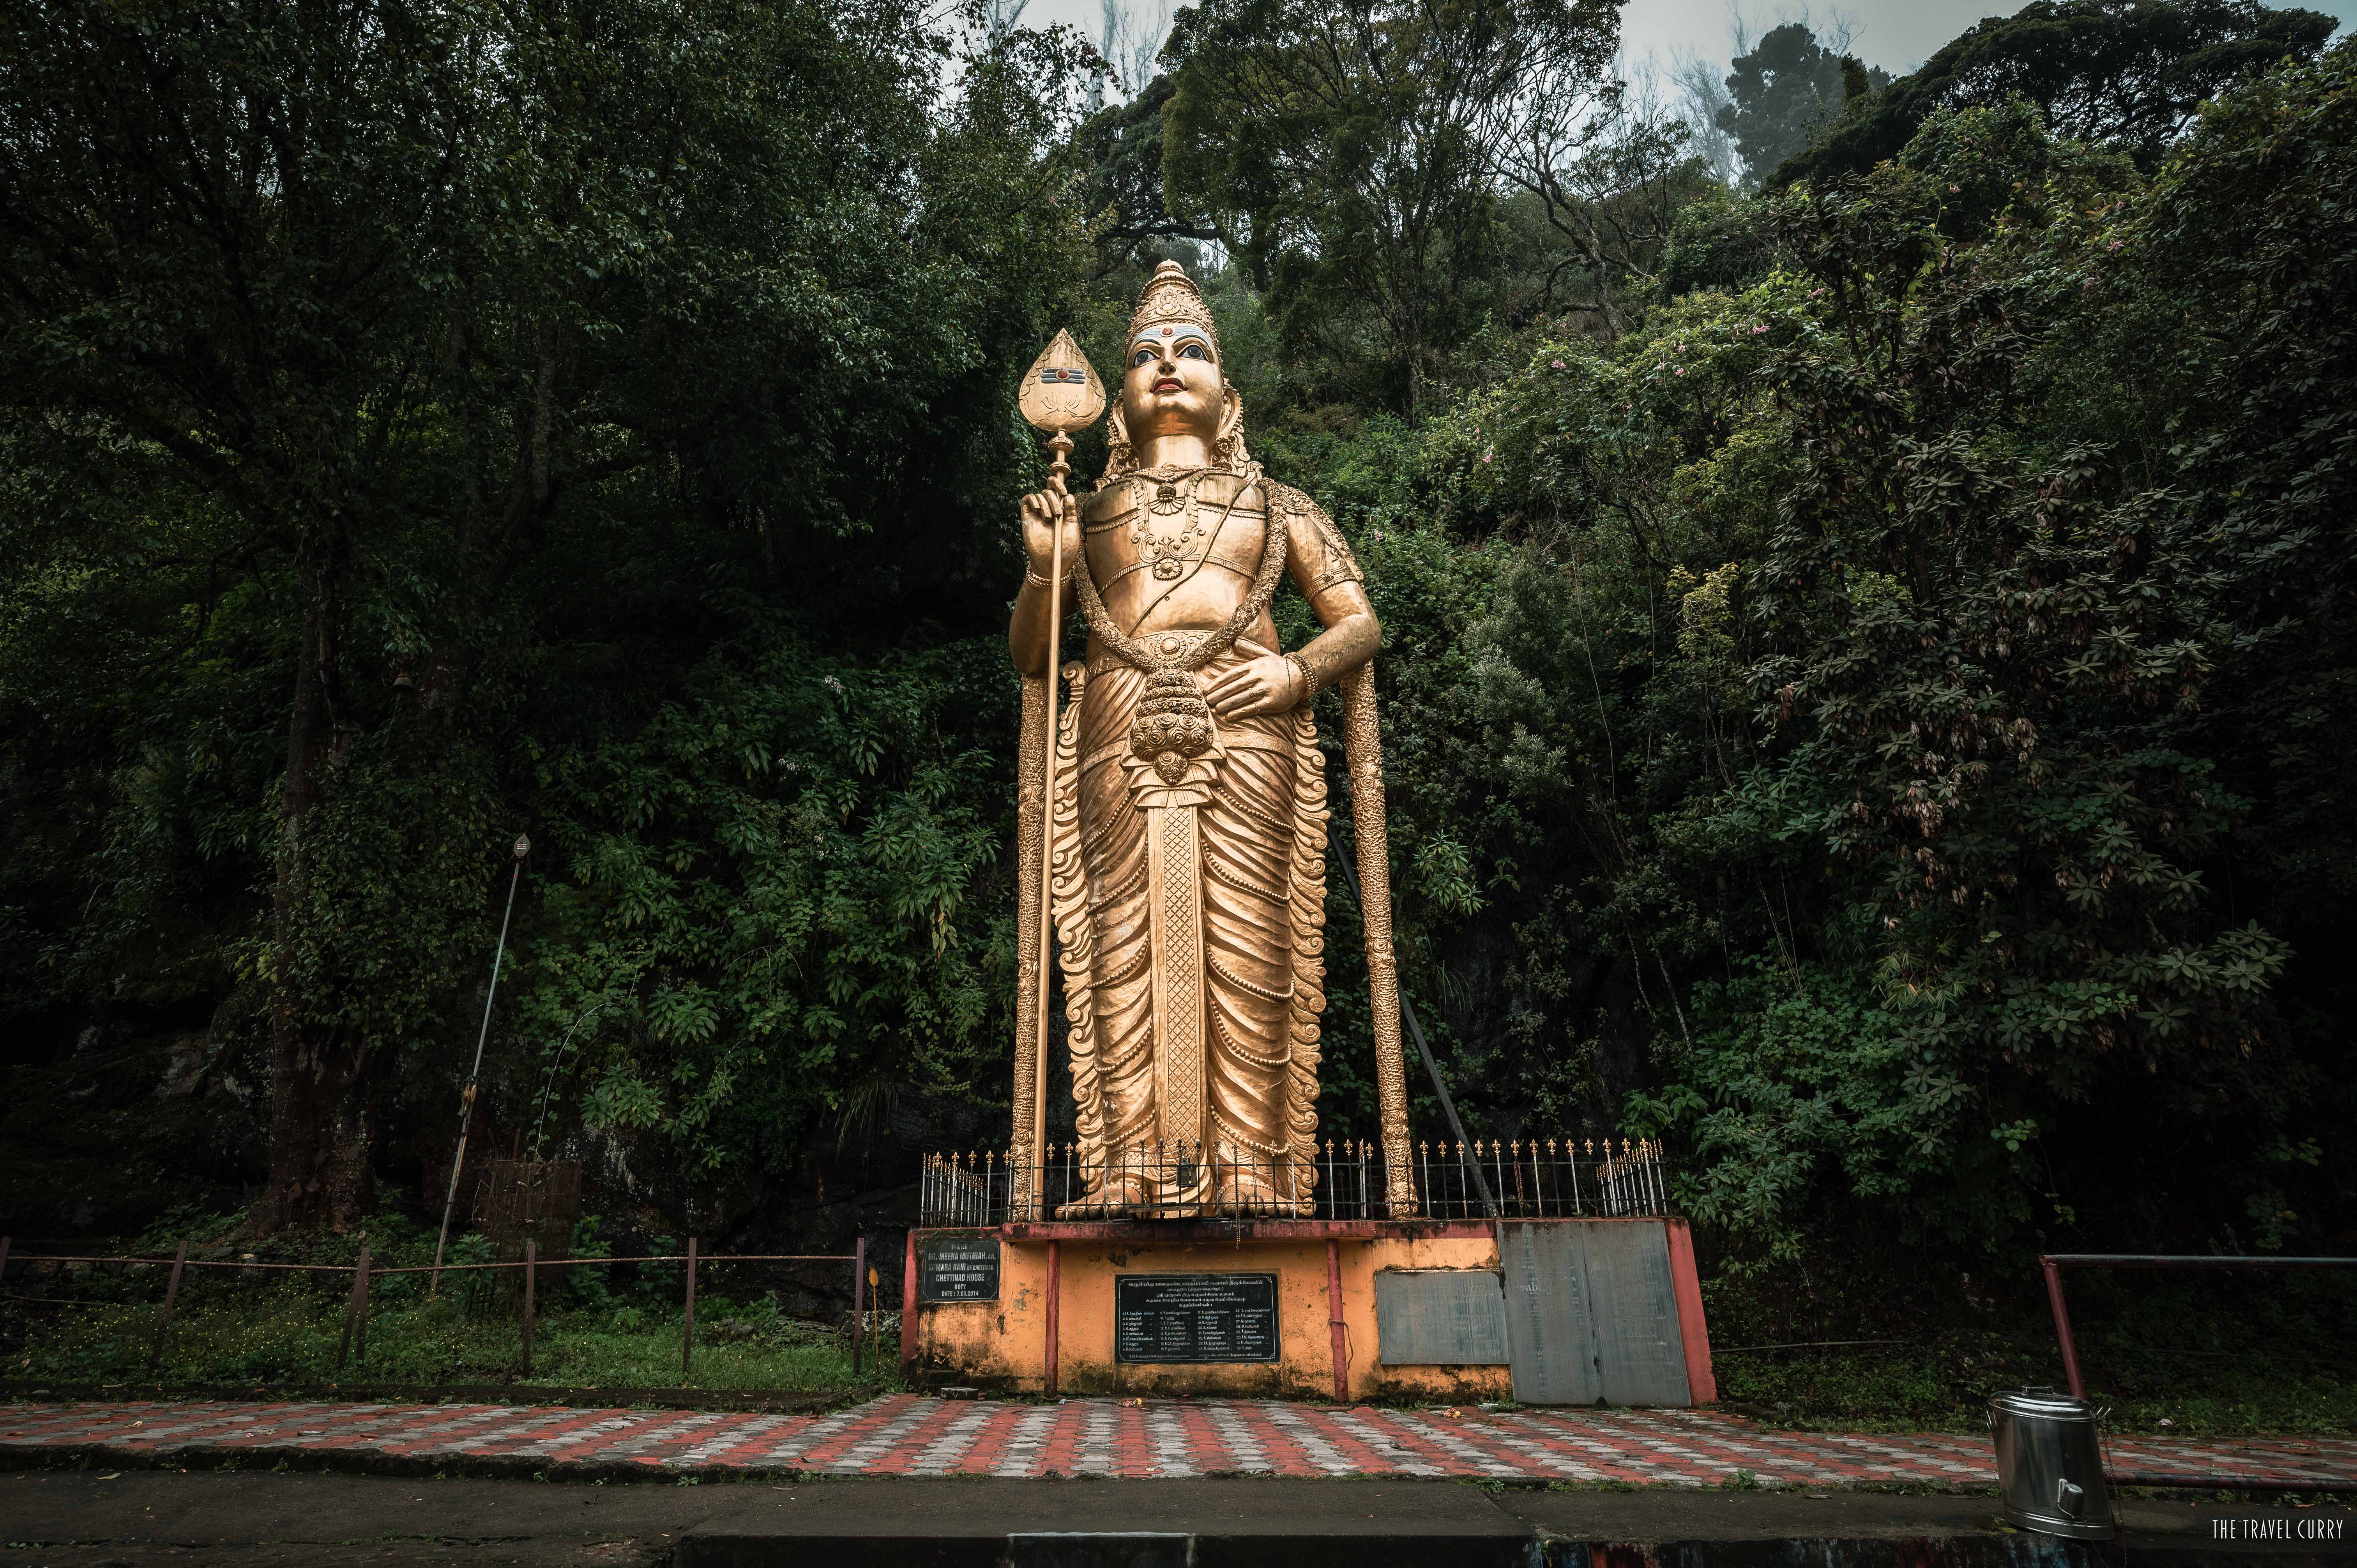 The golden statue of Lord Murugan in Ooty